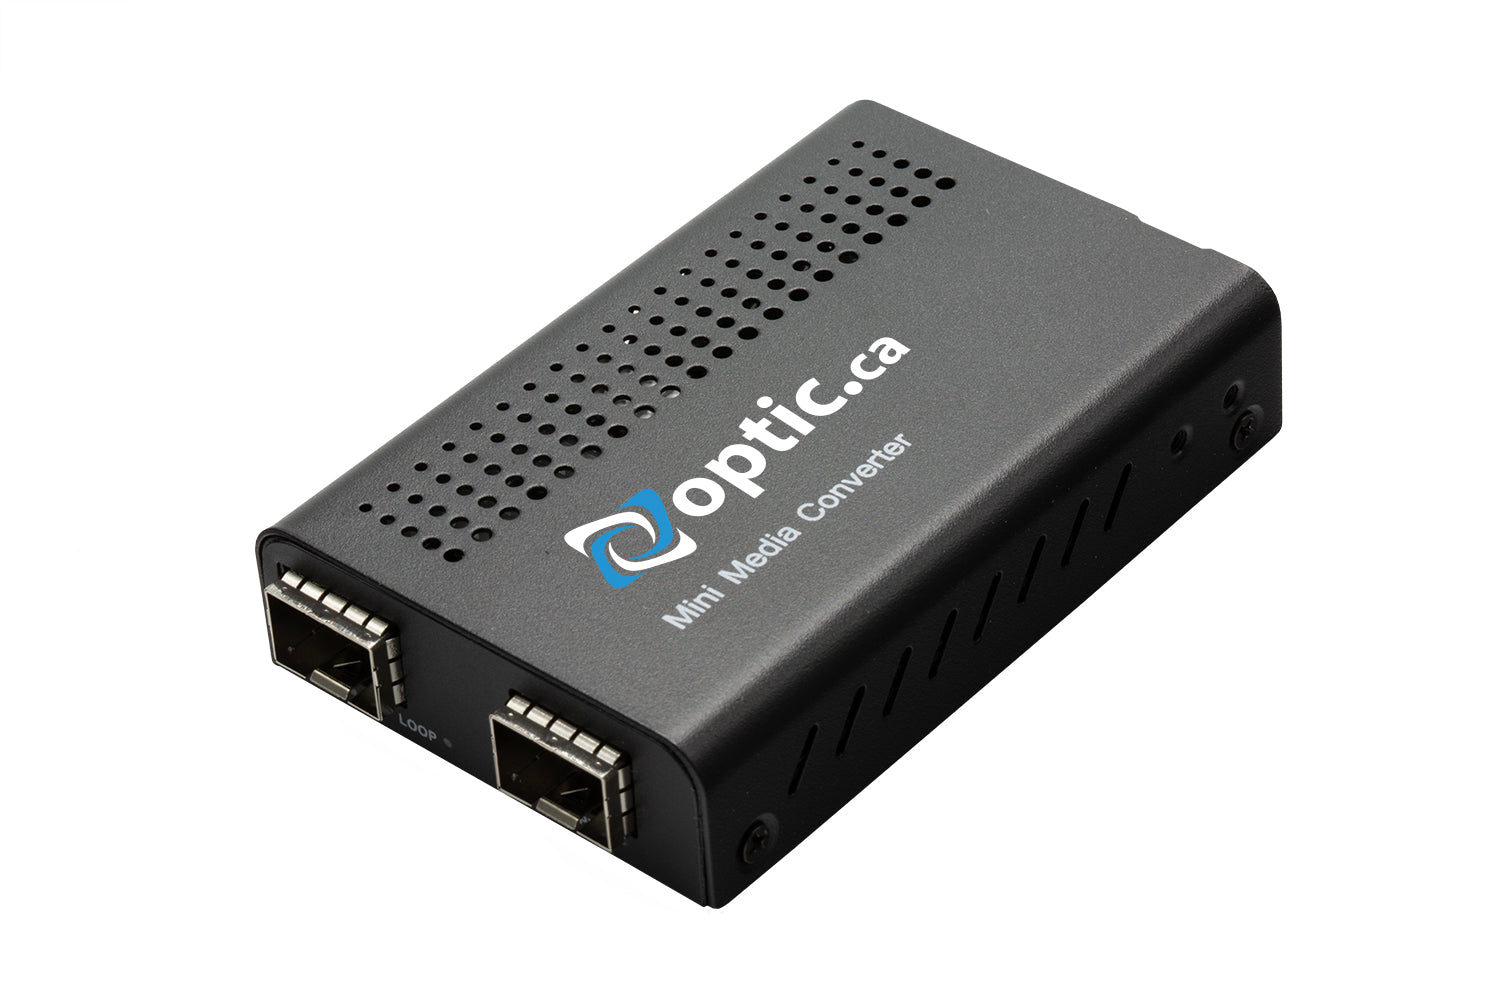 Optic.ca Media Converters and OEO